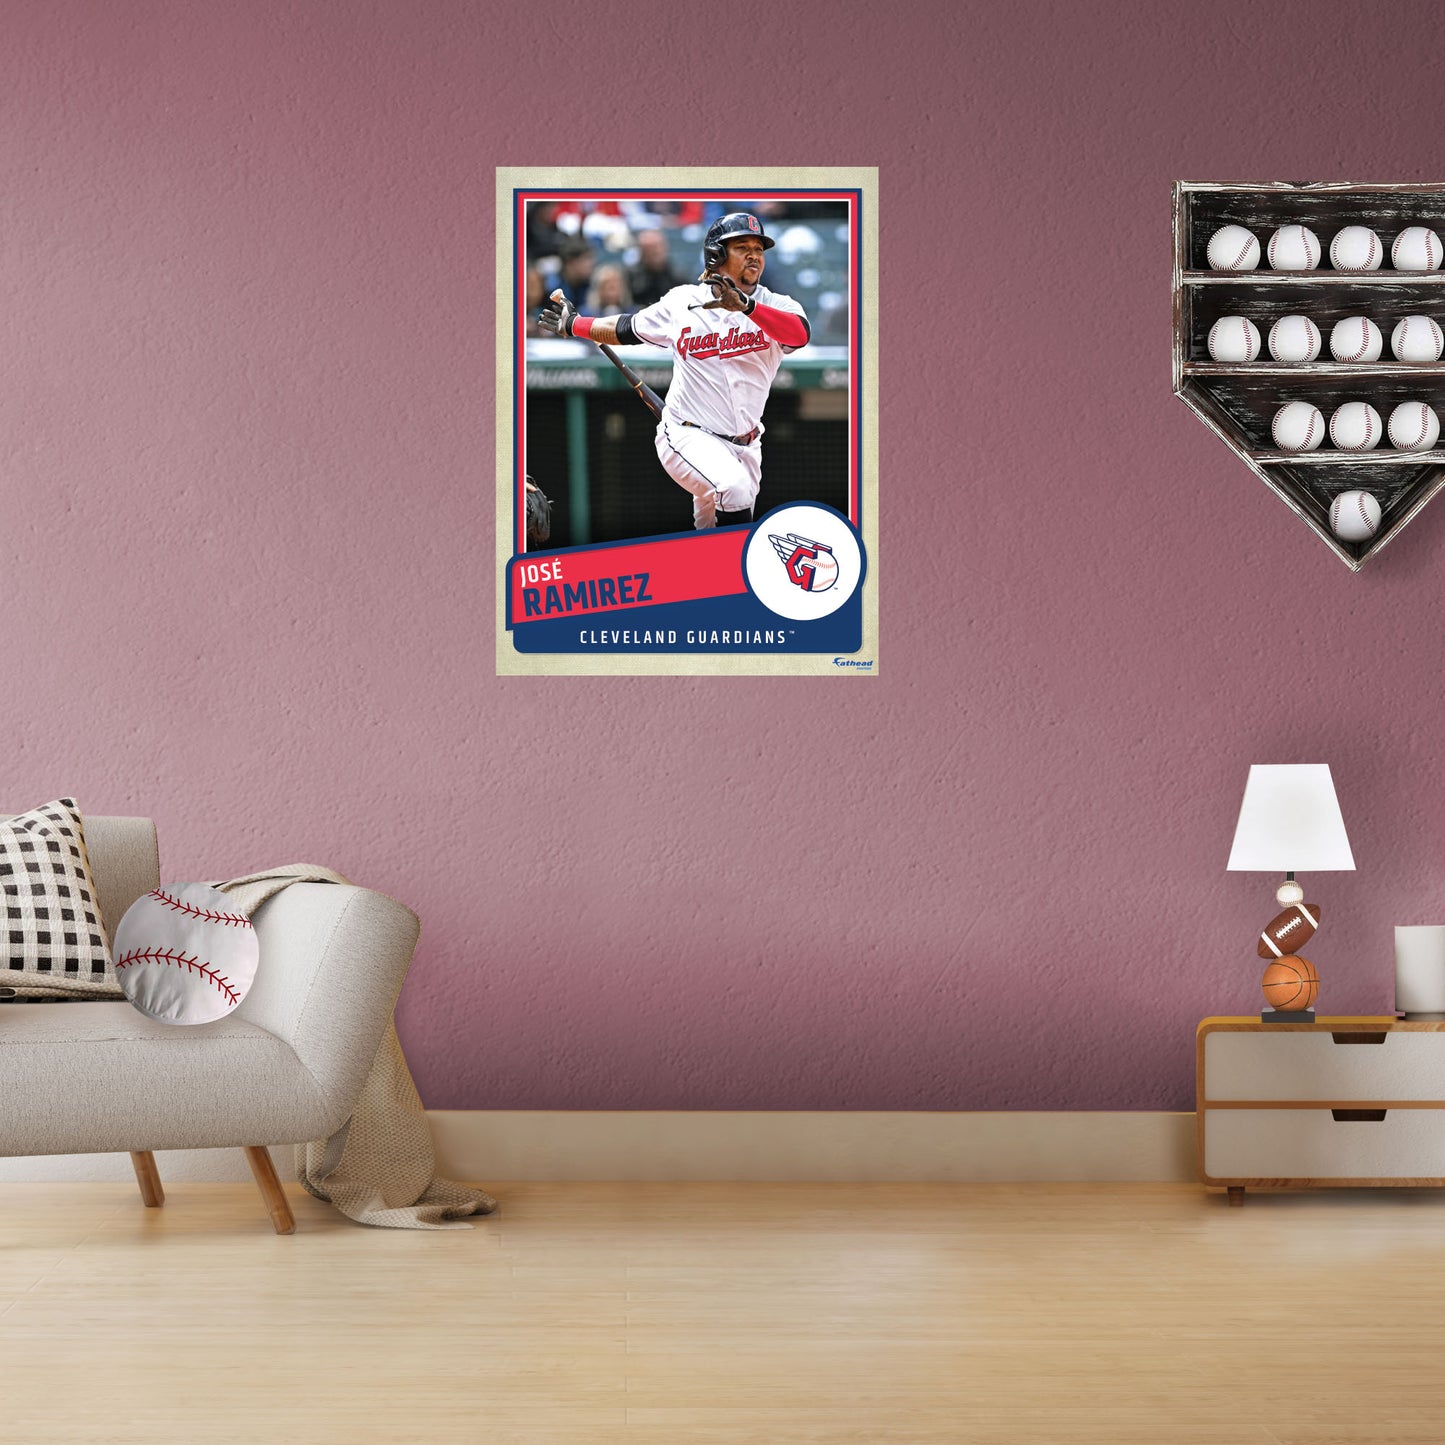 Cleveland Guardians: José Ramirez  Poster        - Officially Licensed MLB Removable     Adhesive Decal